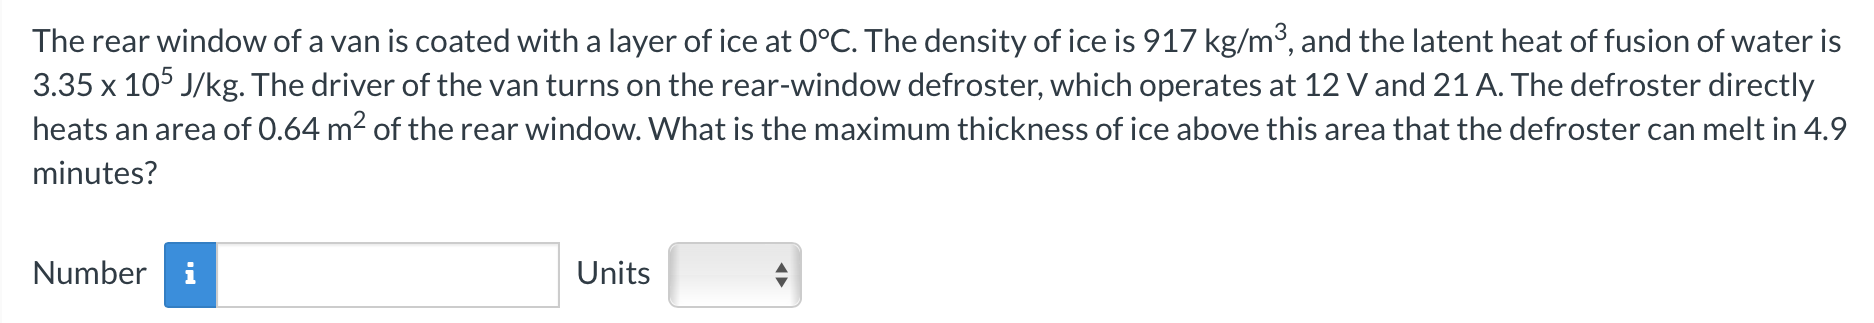 The Rear Window Of A Van Is Coated With A Layer Of Ice At 0 C The Density Of Ice Is 917 Kg M3 And The Latent Heat Of F 1